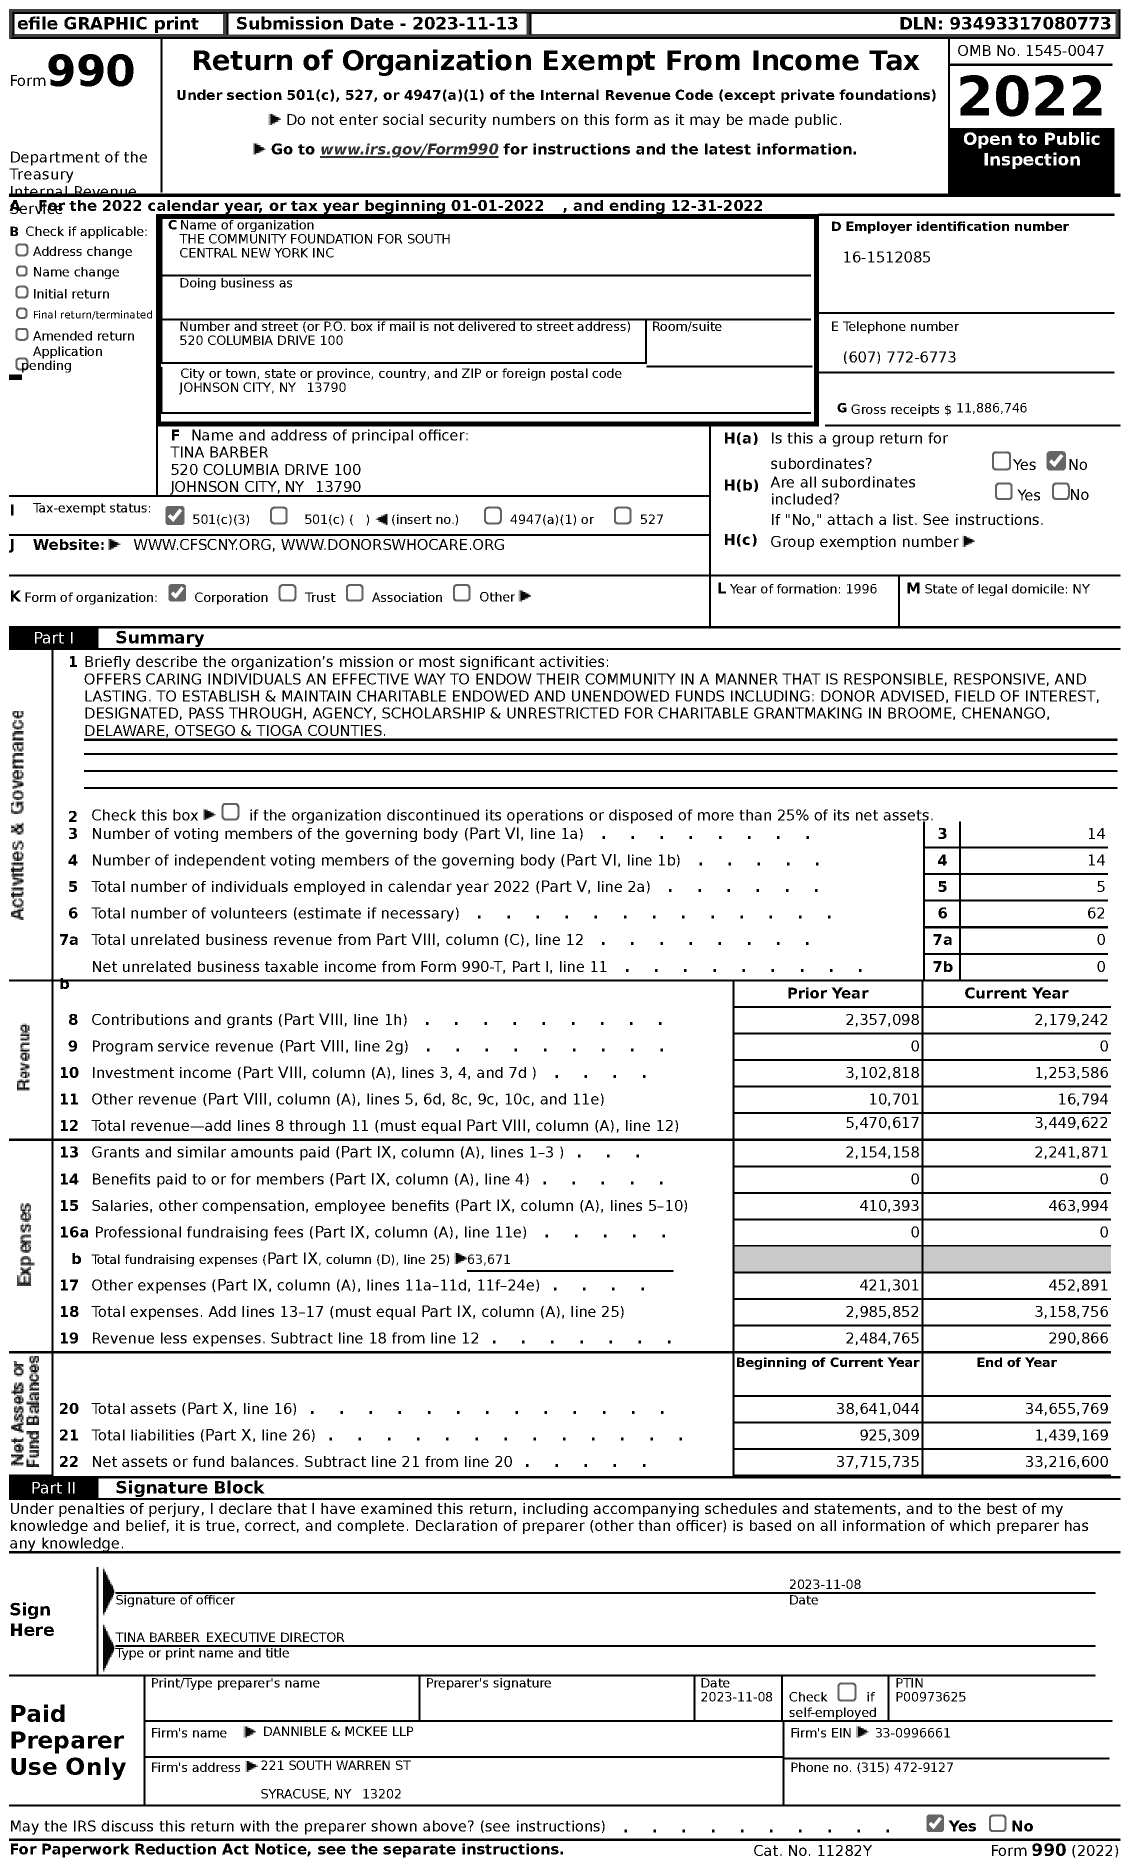 Image of first page of 2022 Form 990 for Community Foundation for South Central New York (CFSCNY)